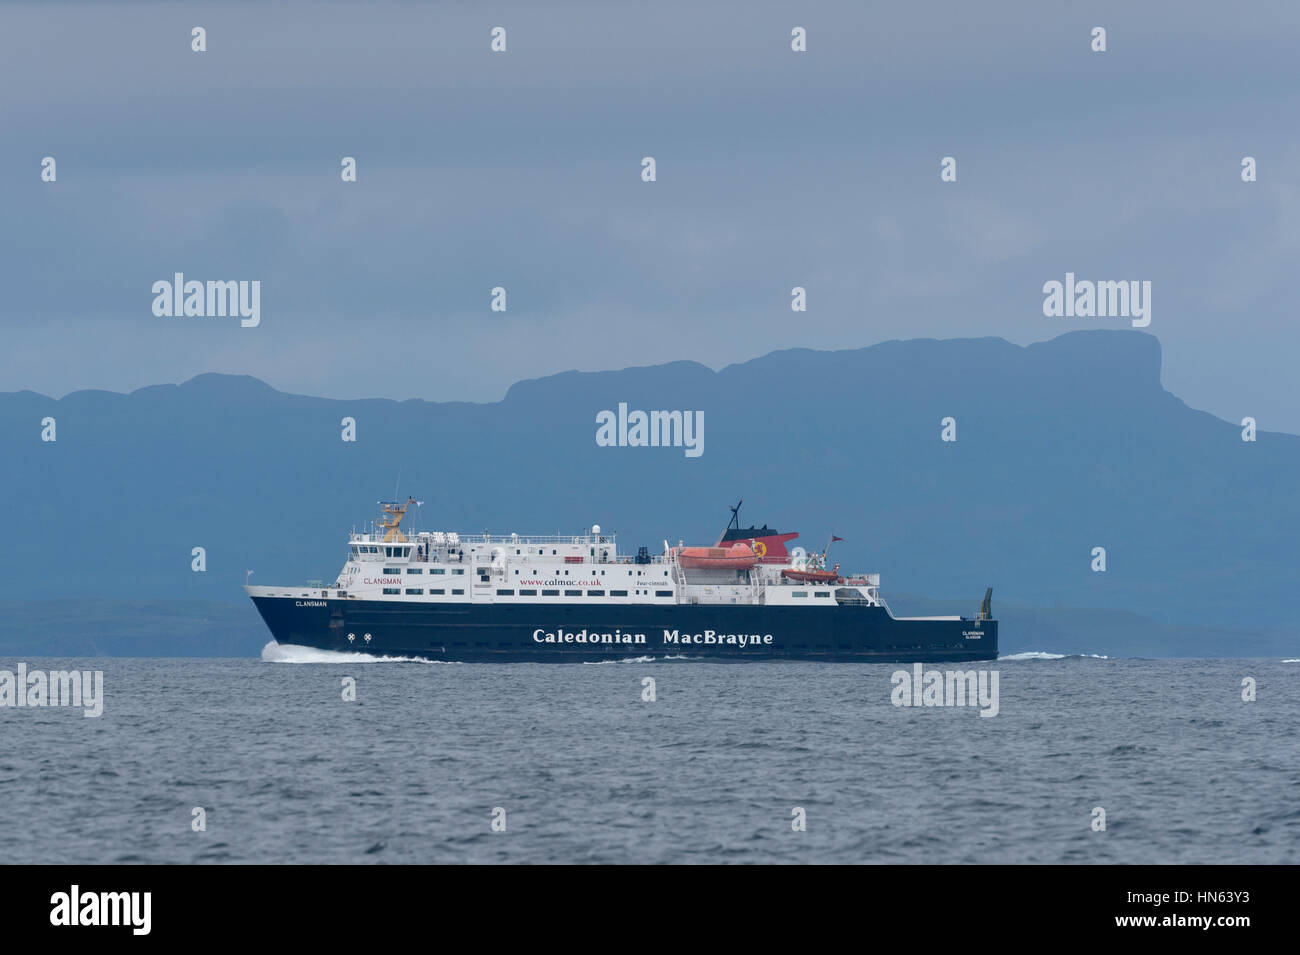 Caledonian MacBrayne ferry “Clansman” passing the isle of Eigg in the Small Isles, Scotland. June 2014. Stock Photo